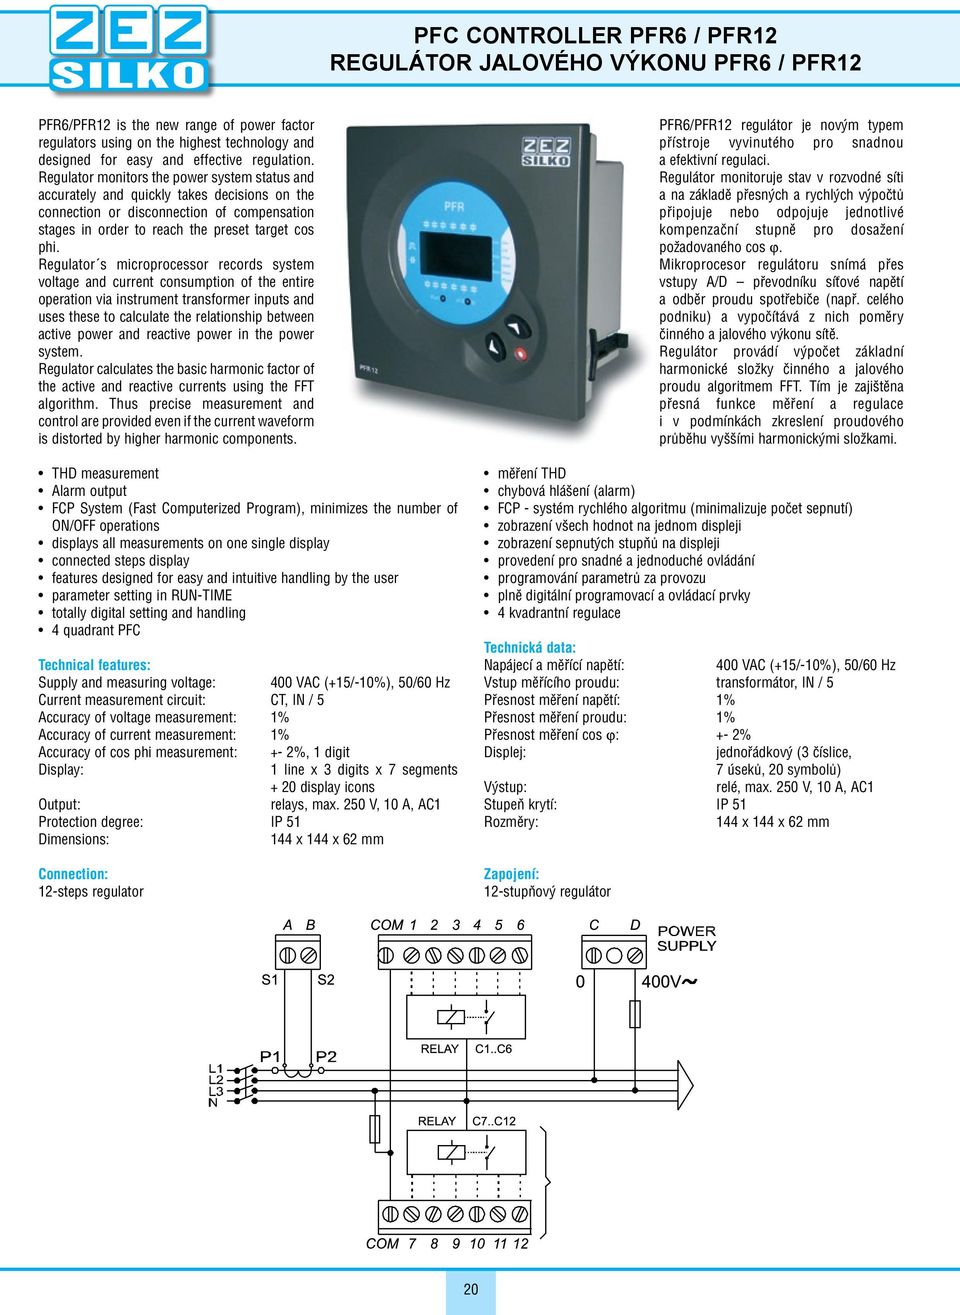 Regulator s microprocessor records system voltage and current consumption of the entire operation via instrument transformer inputs and uses these to calculate the relationship between active power